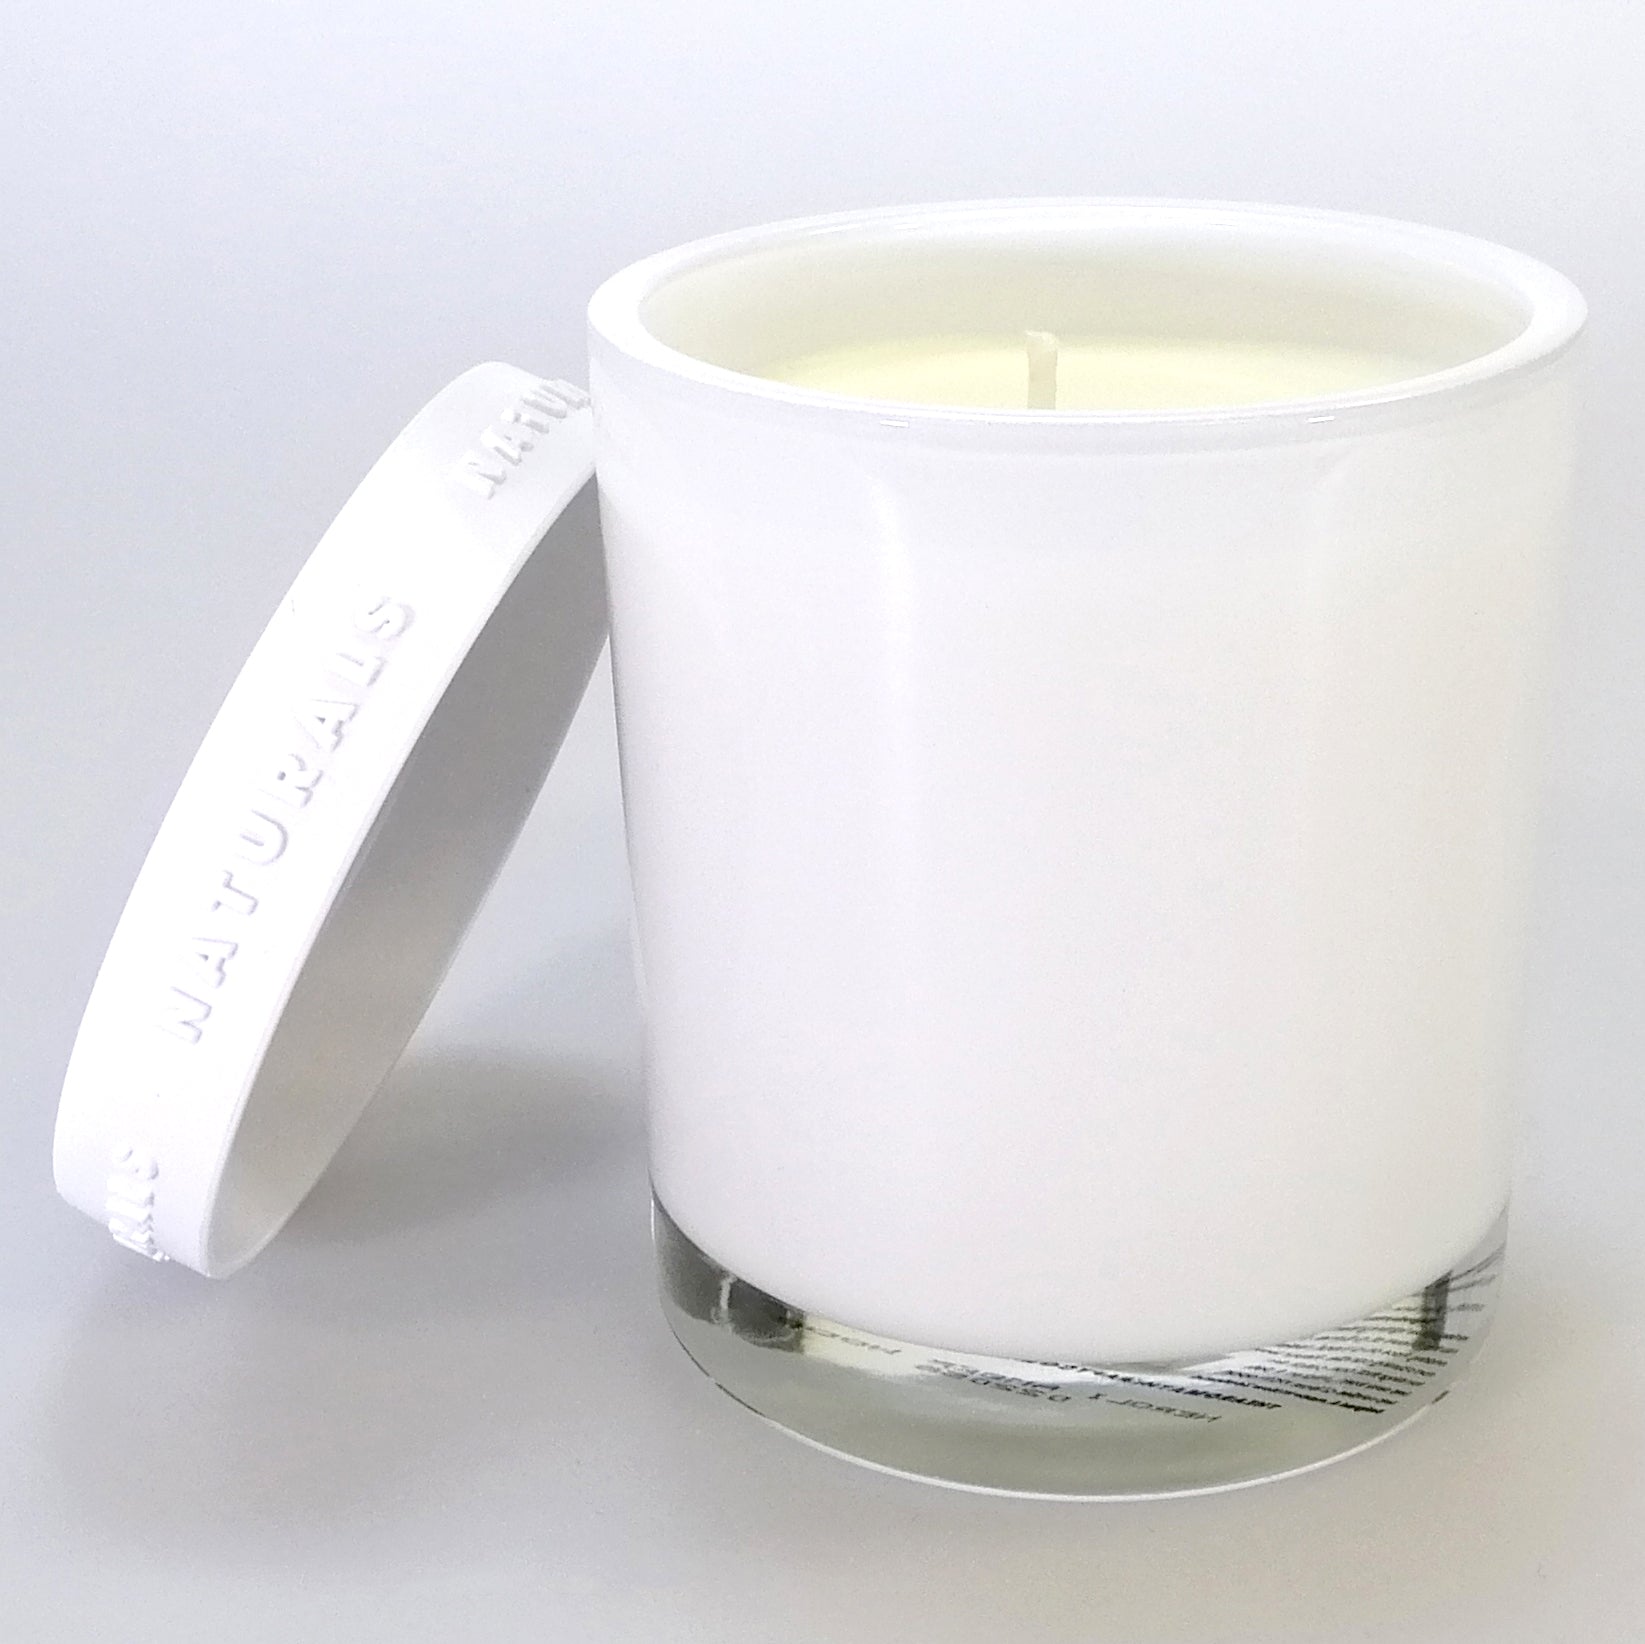 The Aromatherapy Co. Naturals - Neroli & Amber Wood Soy Wax Candle